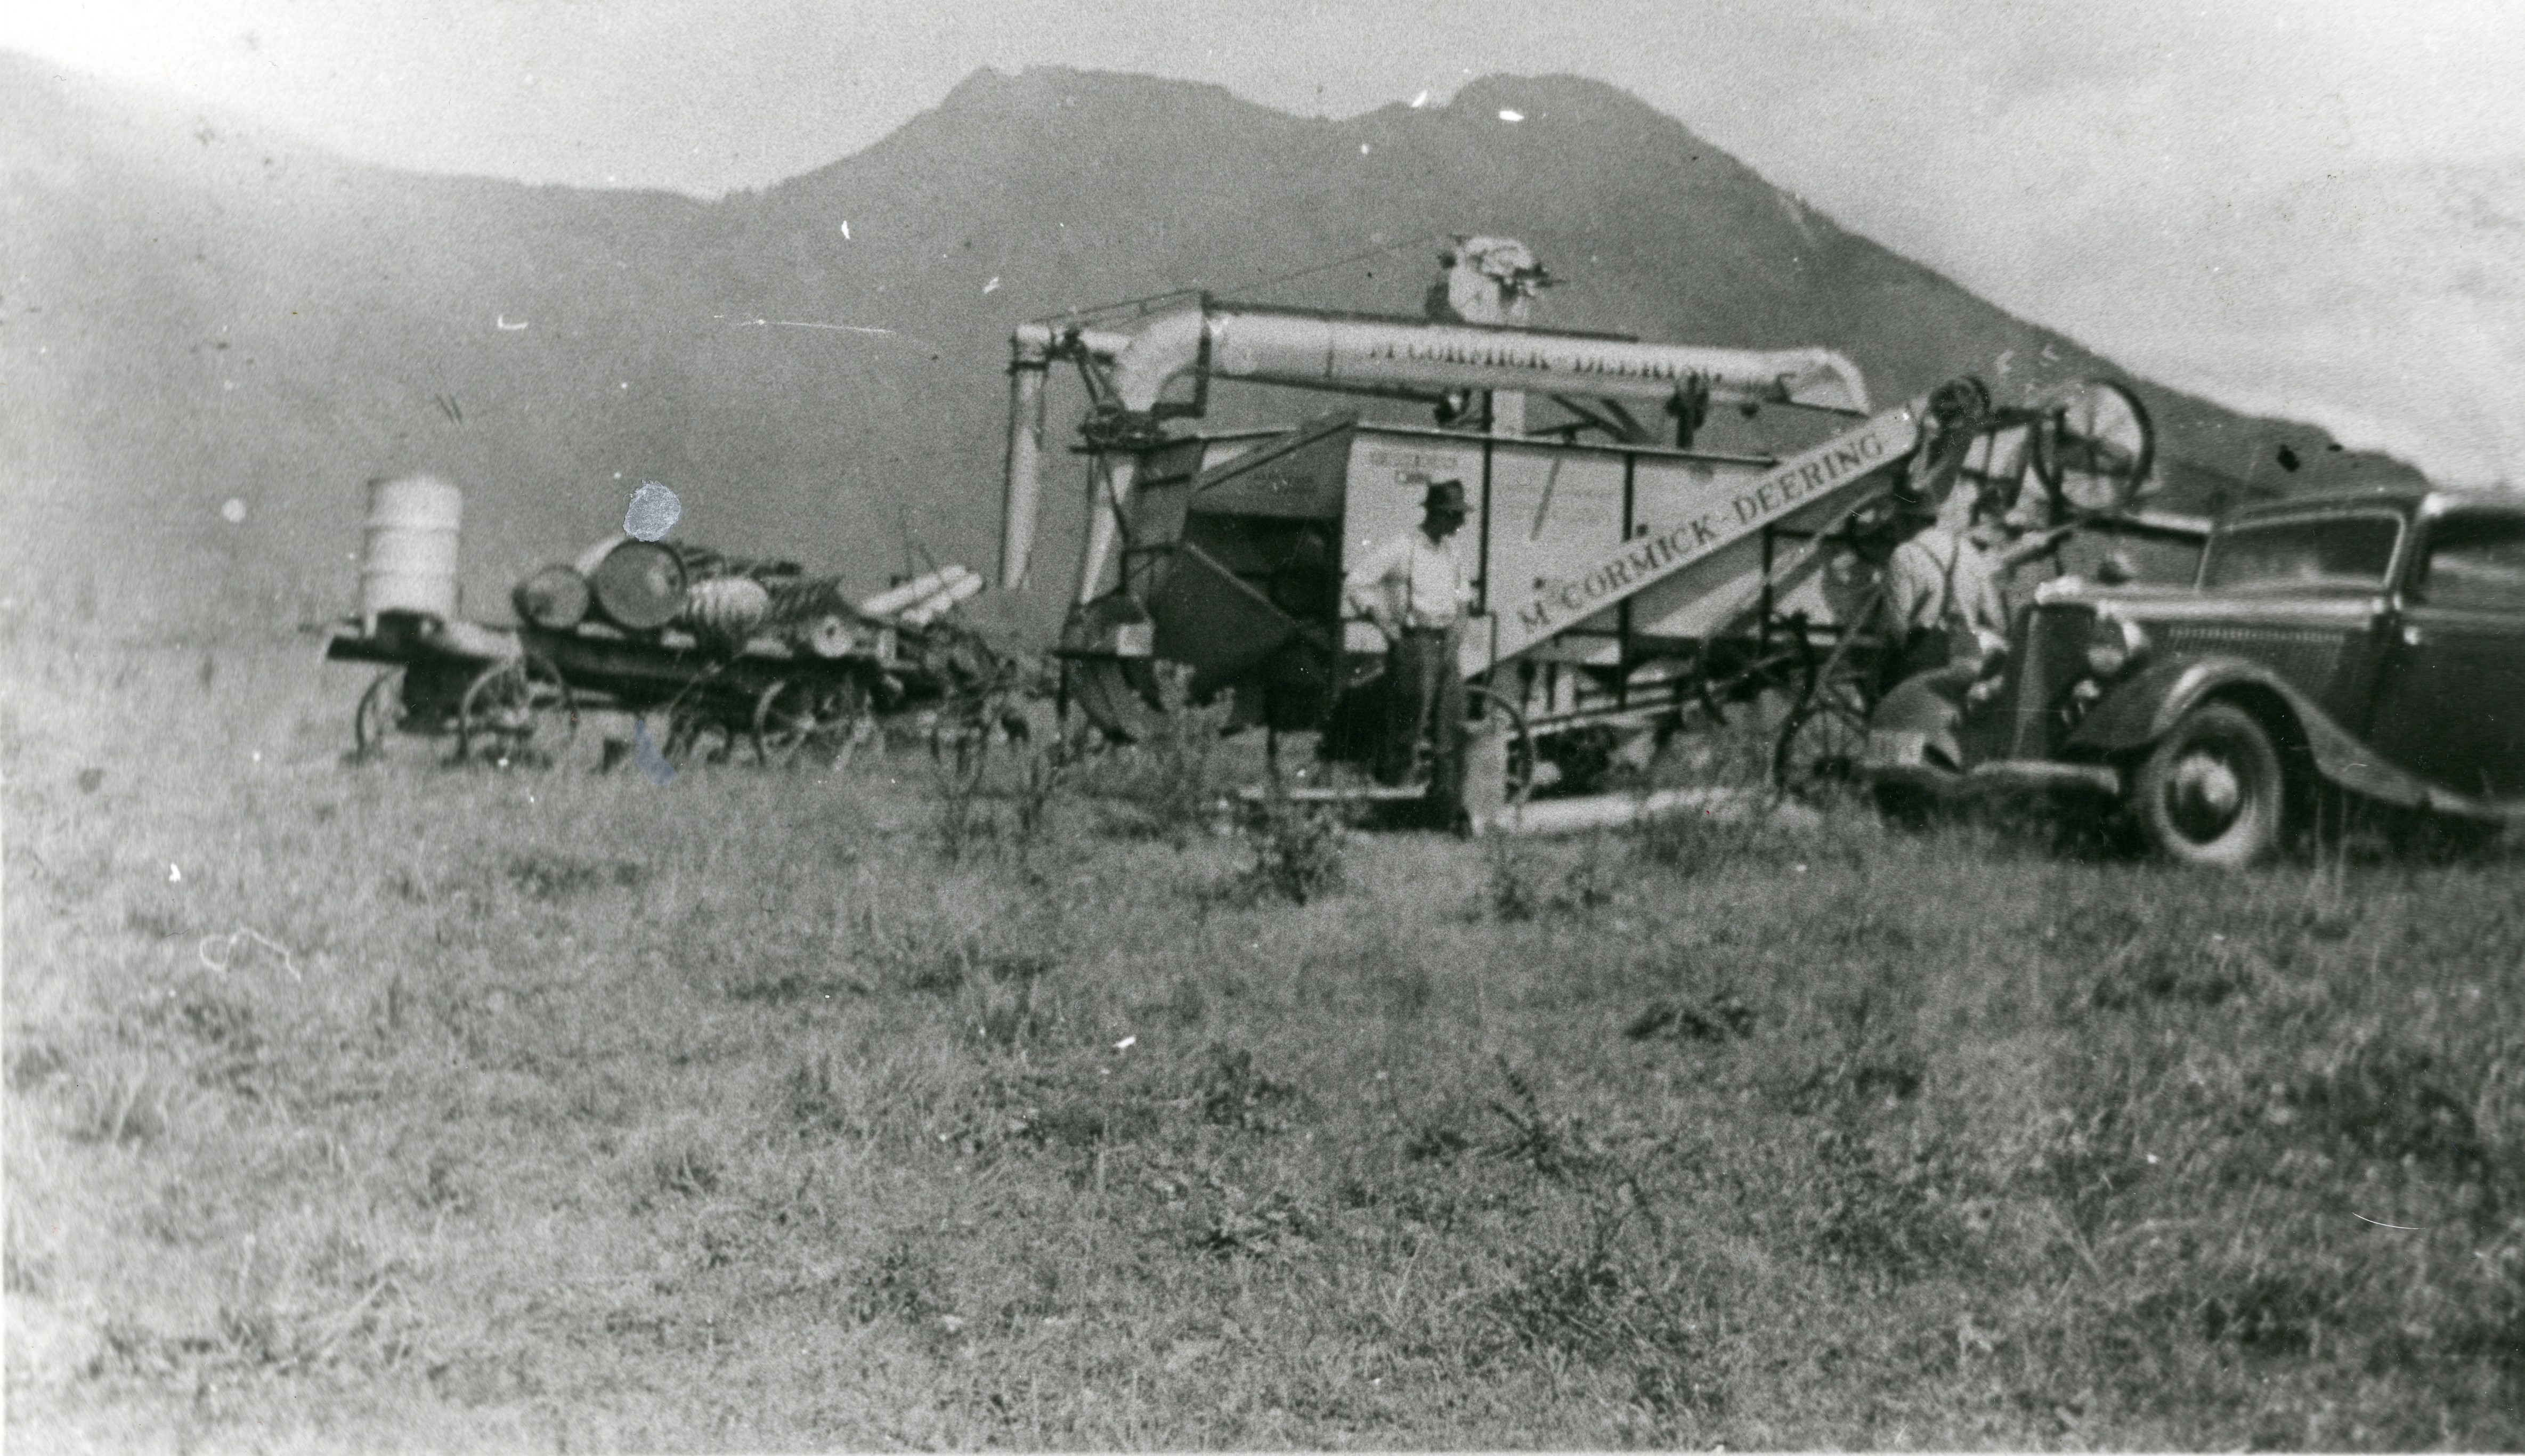 Black and white photograph of men working in a field using a McCormick-Deering thresher. A car is in the foreground and mountains are in the background. A wagon with barrels is adjacent to the thresher.